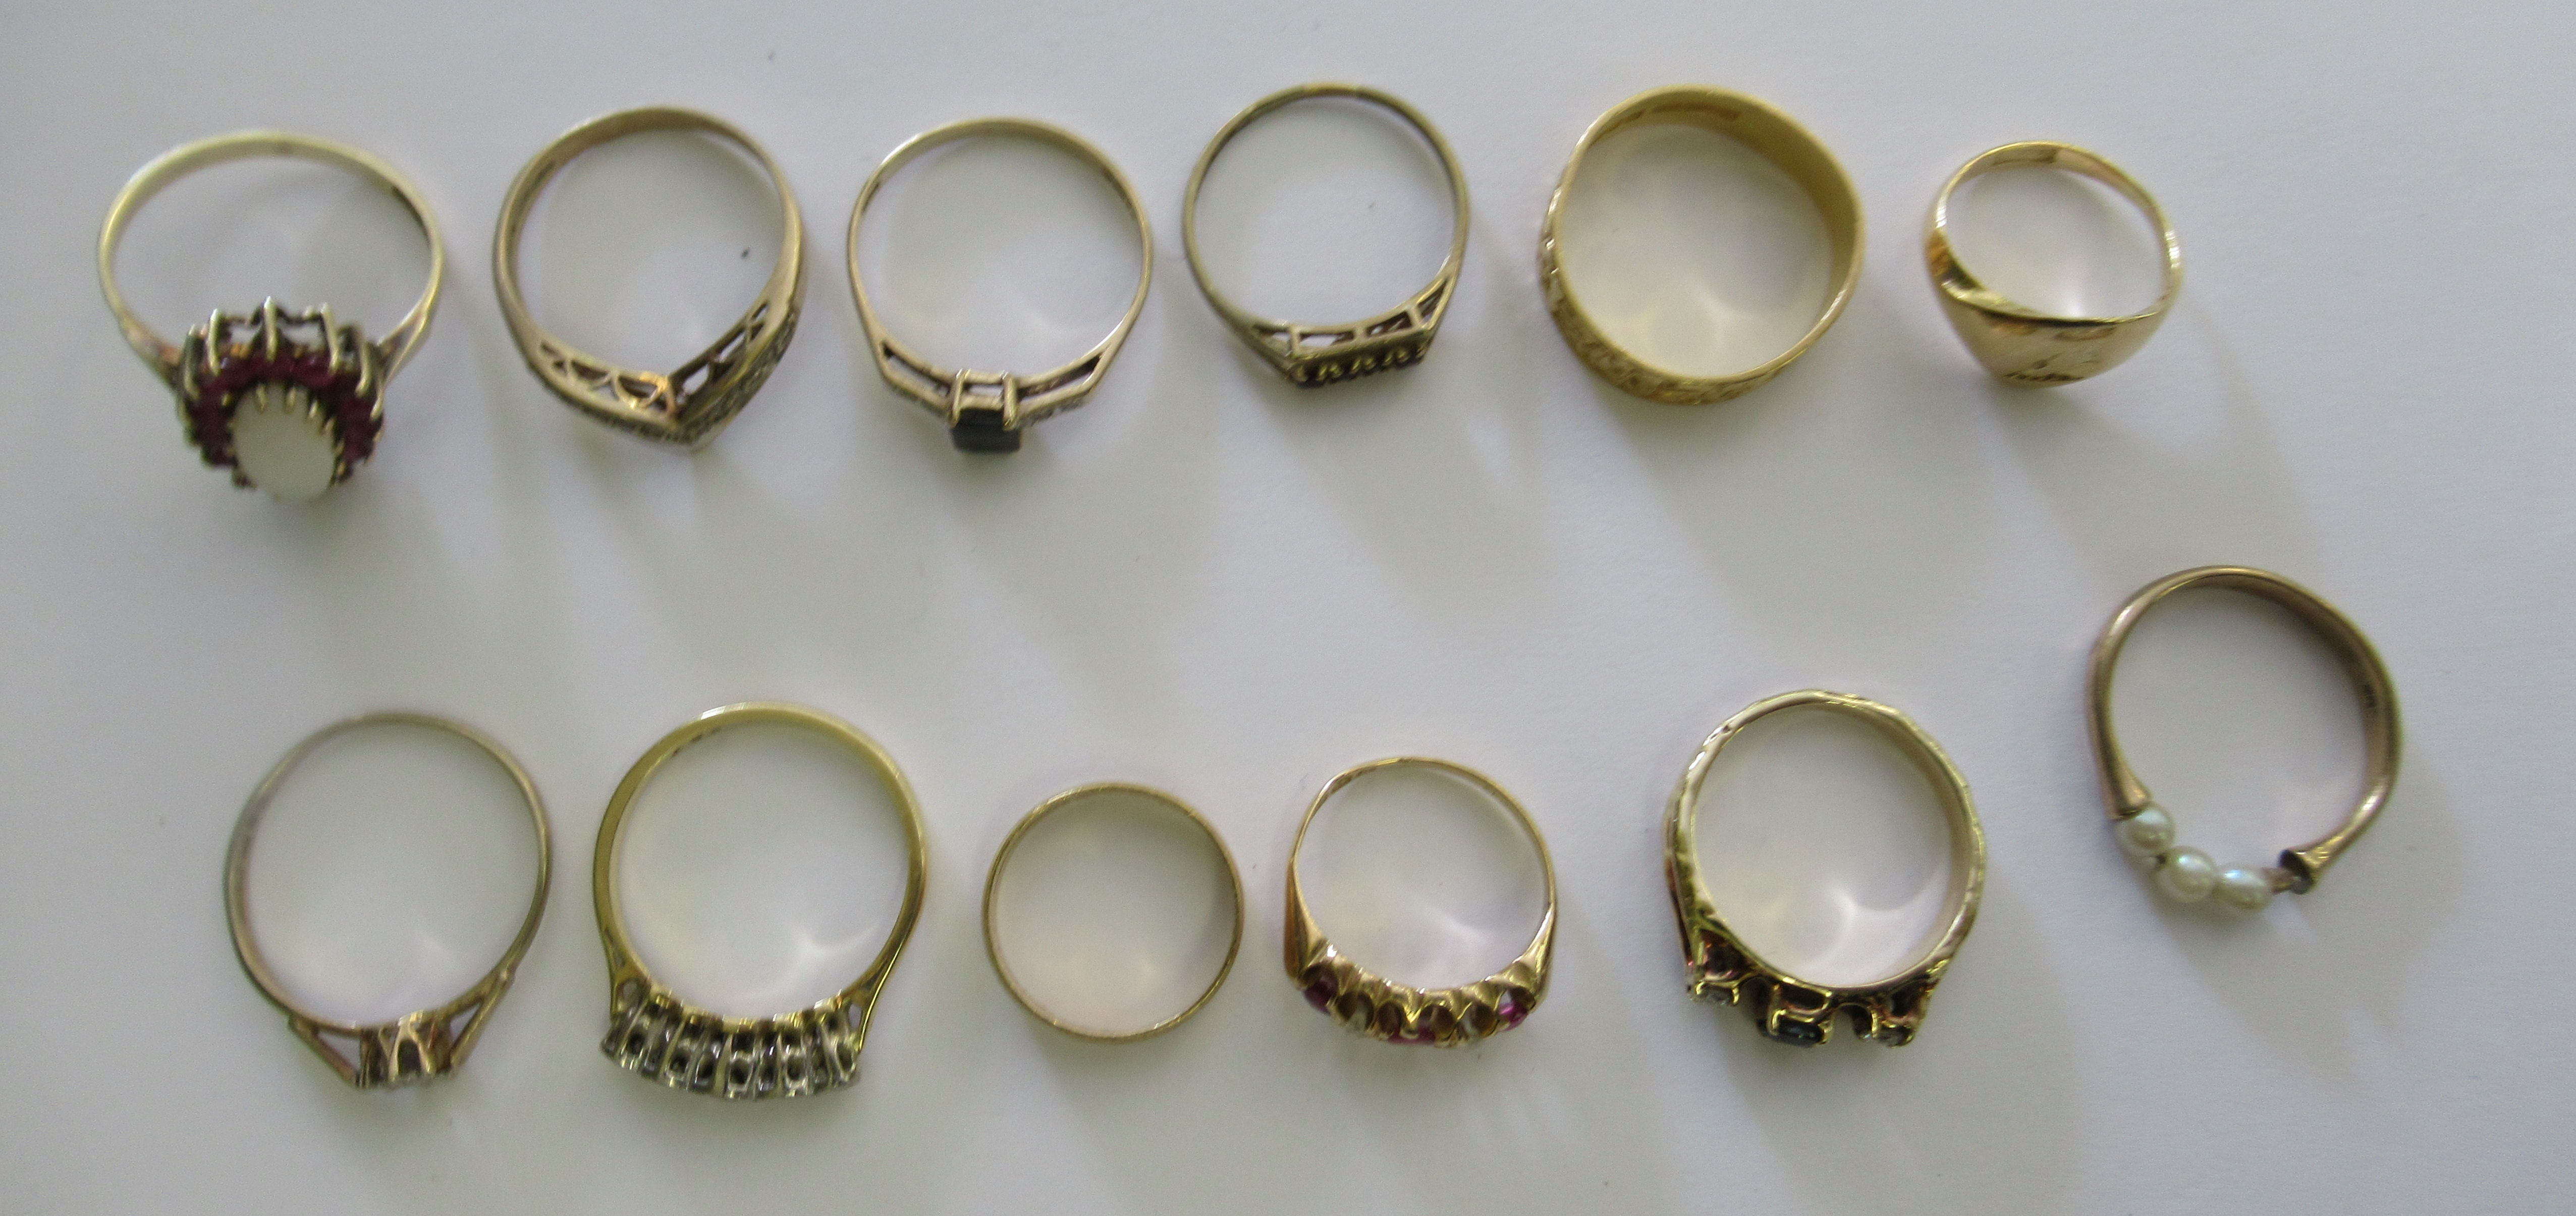 Gold and gold coloured metal rings, - Image 2 of 2